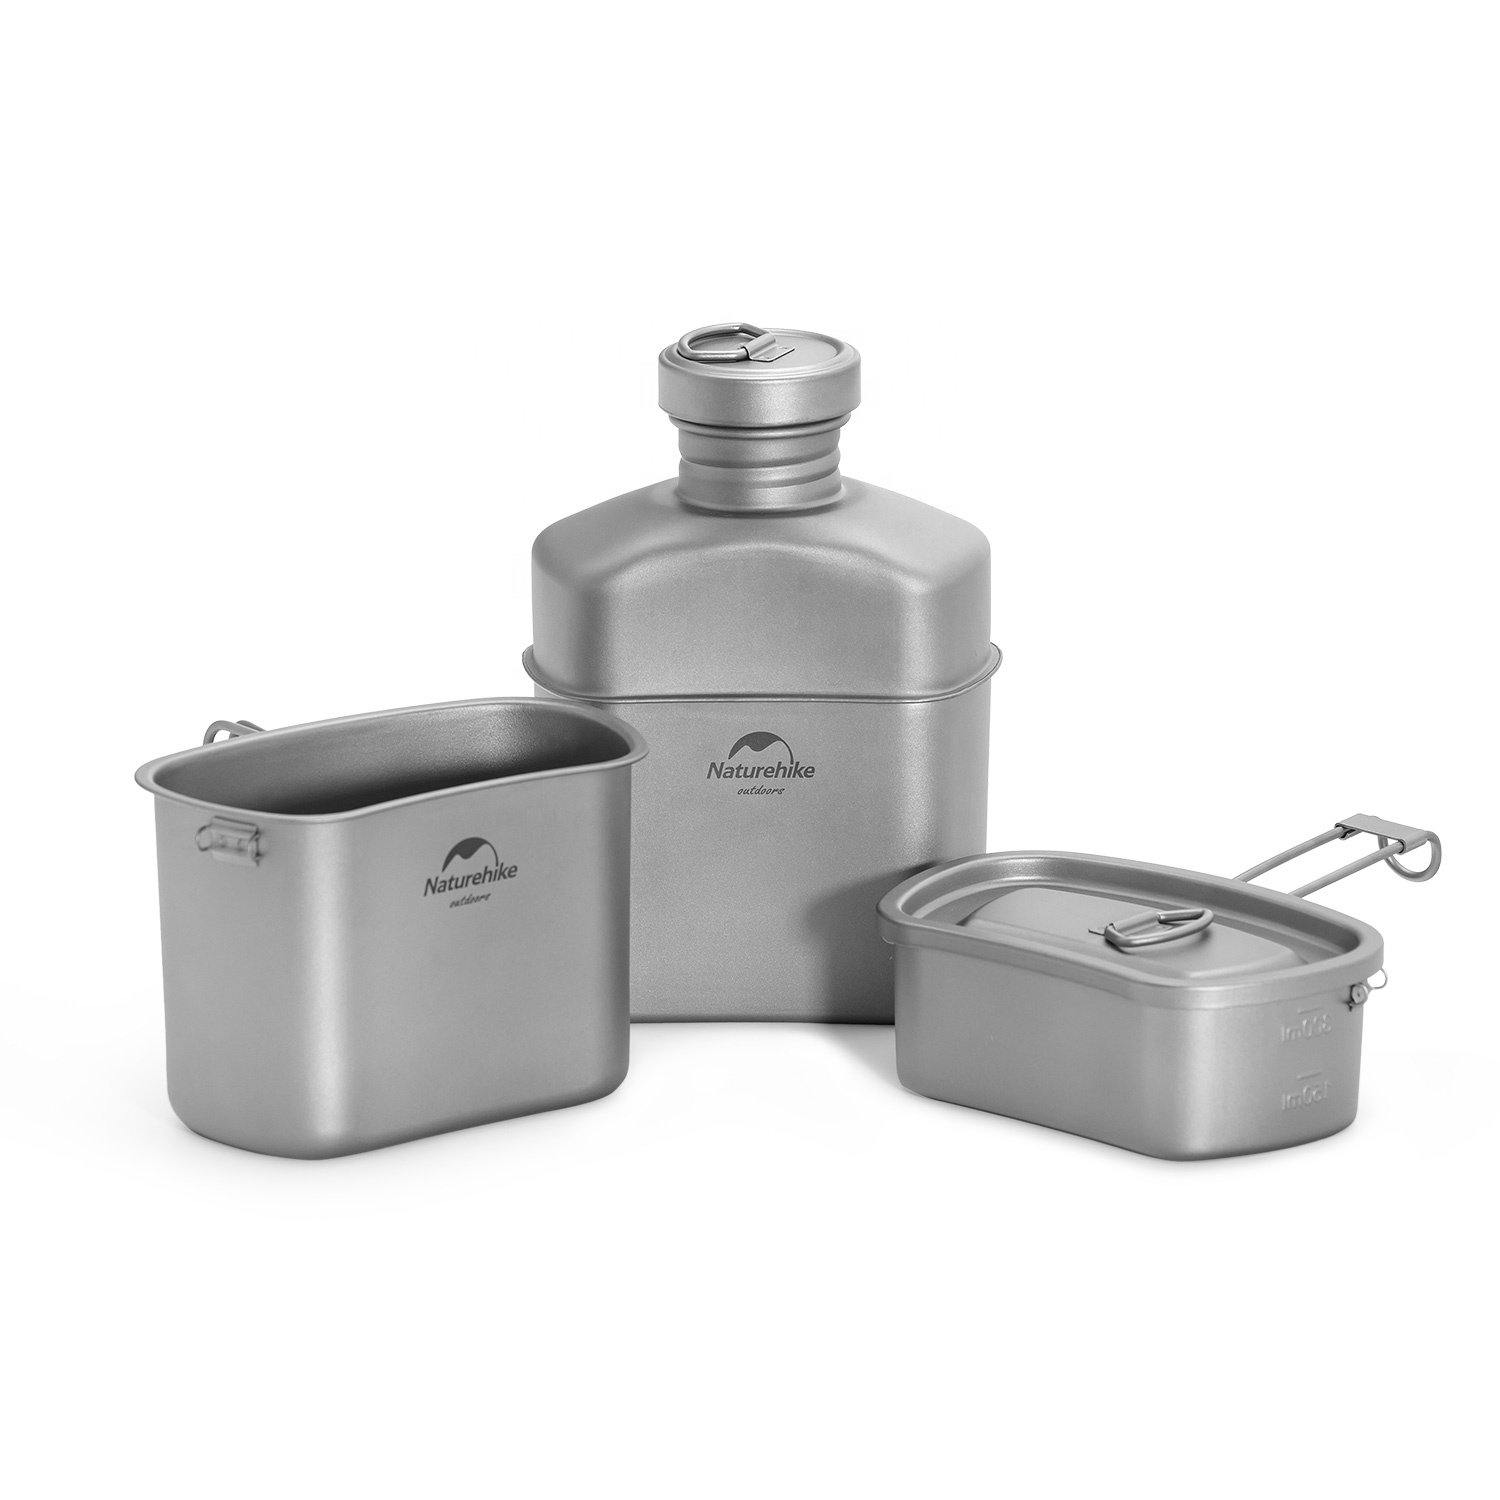 Compact Titanium Lunch Box for Outdoor Activities LeakProof 800ml Capacity